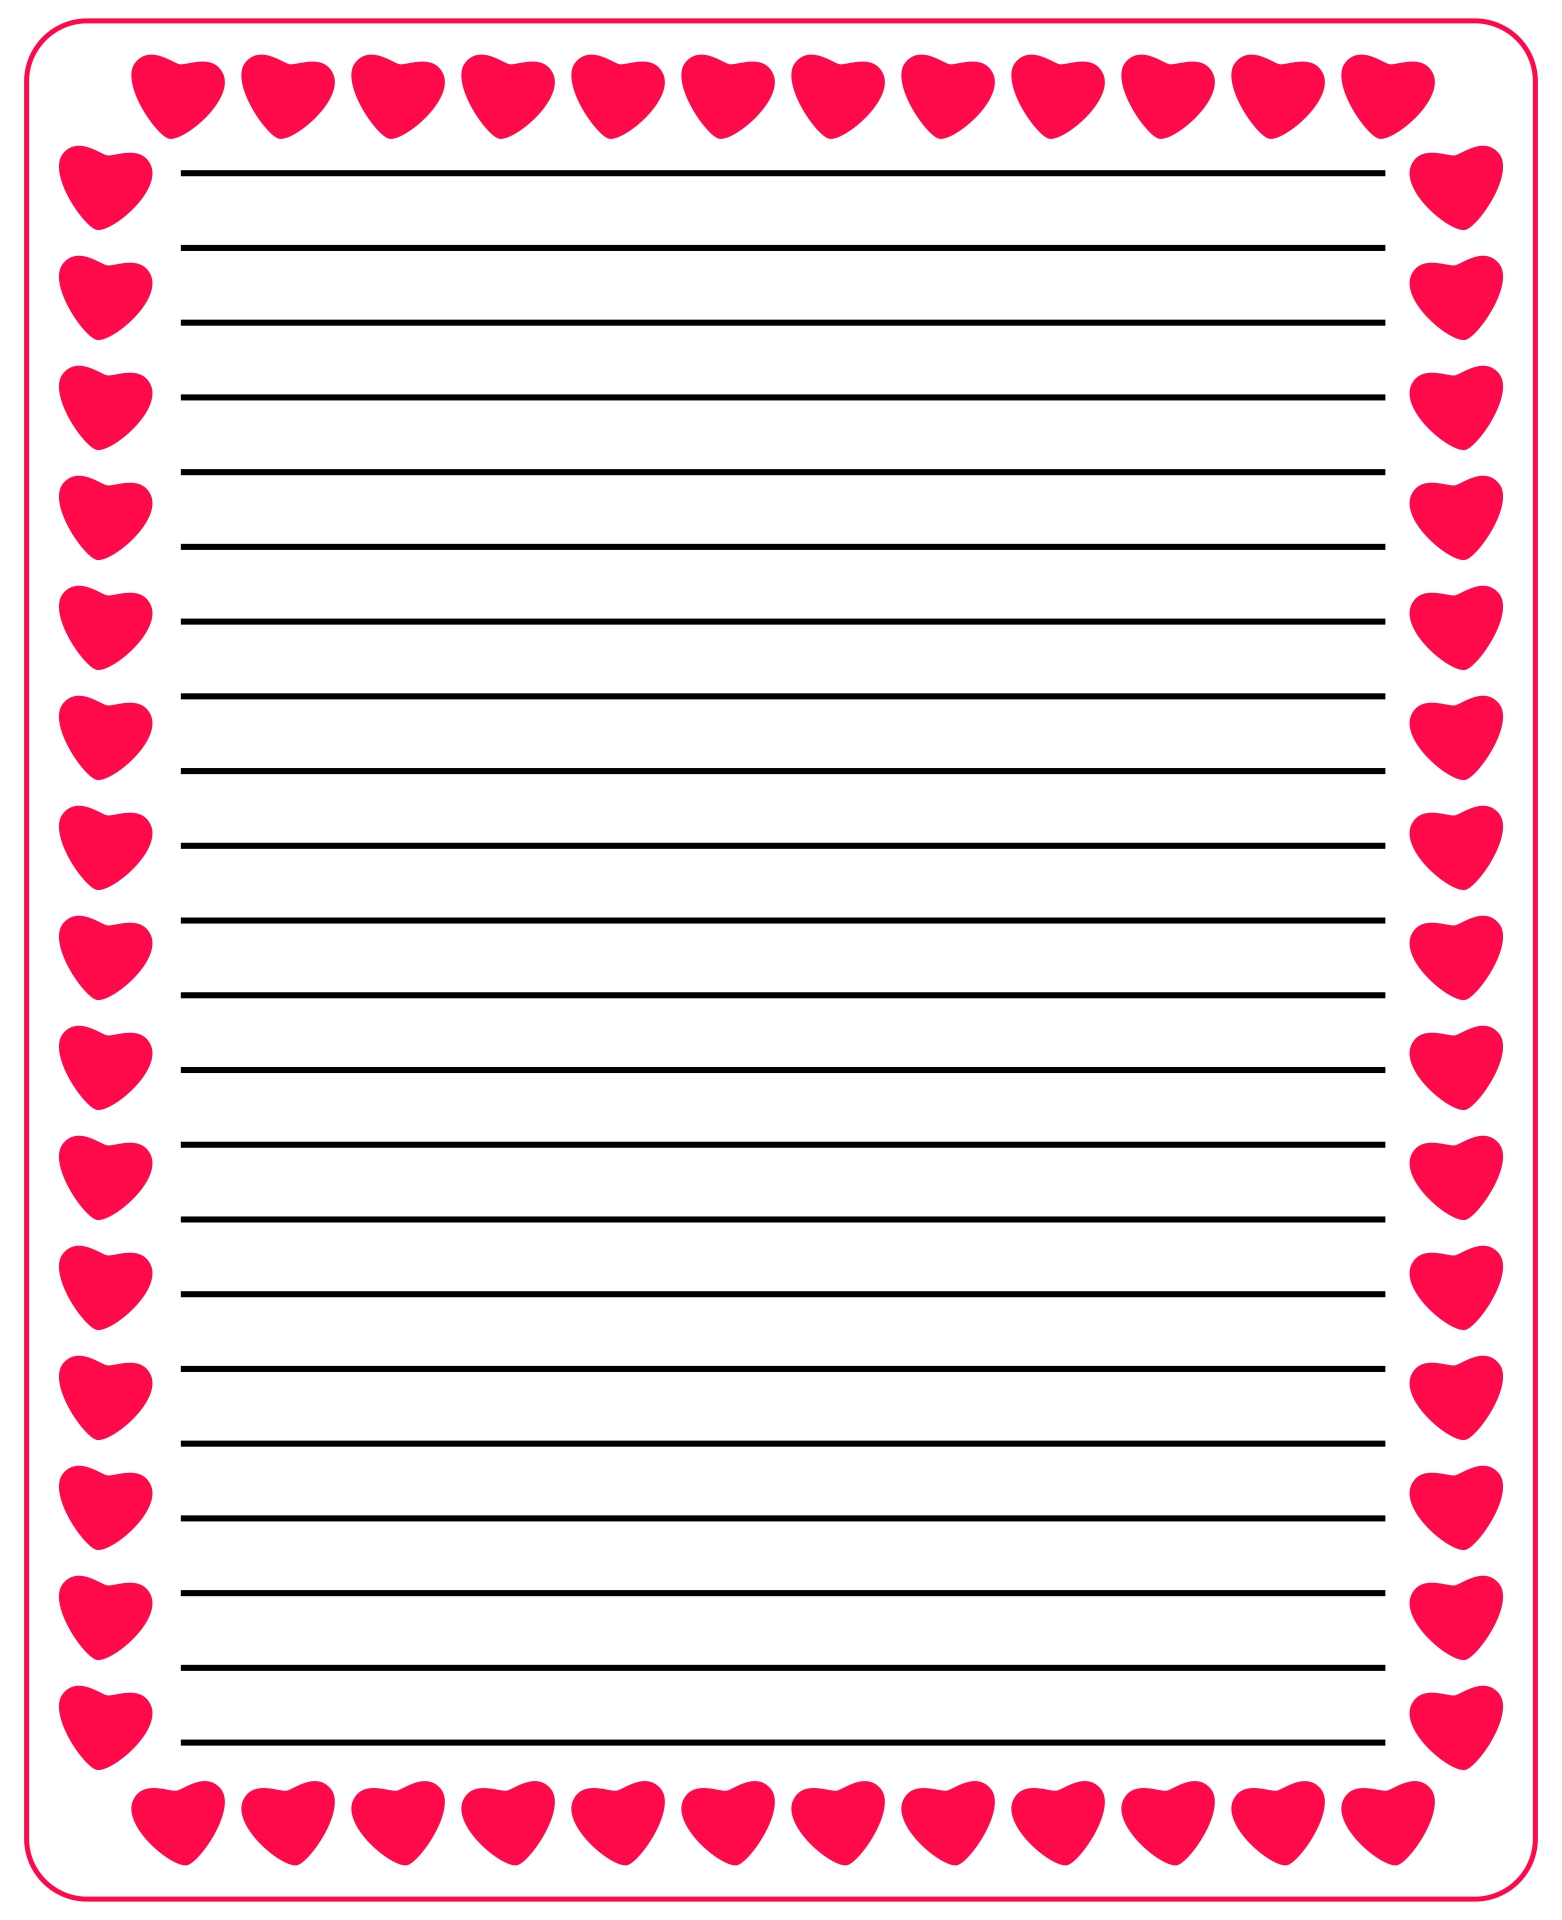 free-printable-lined-stationery